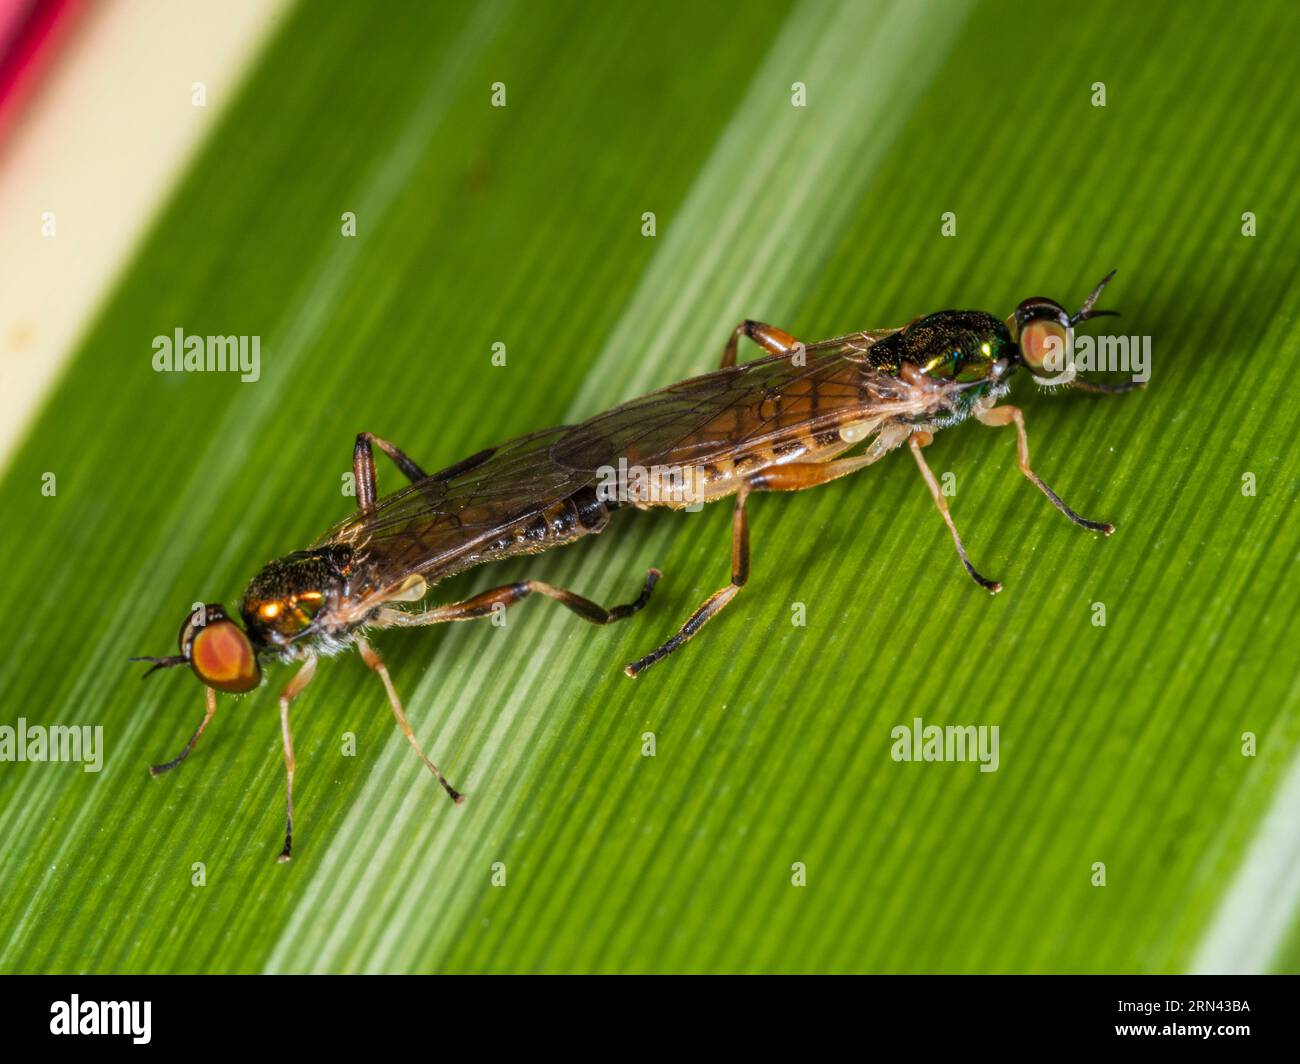 Adult pair of the bright four-spined legionnaire soldier fly, Chorisops nagatomii, mating in a Devon, UK garden Stock Photo